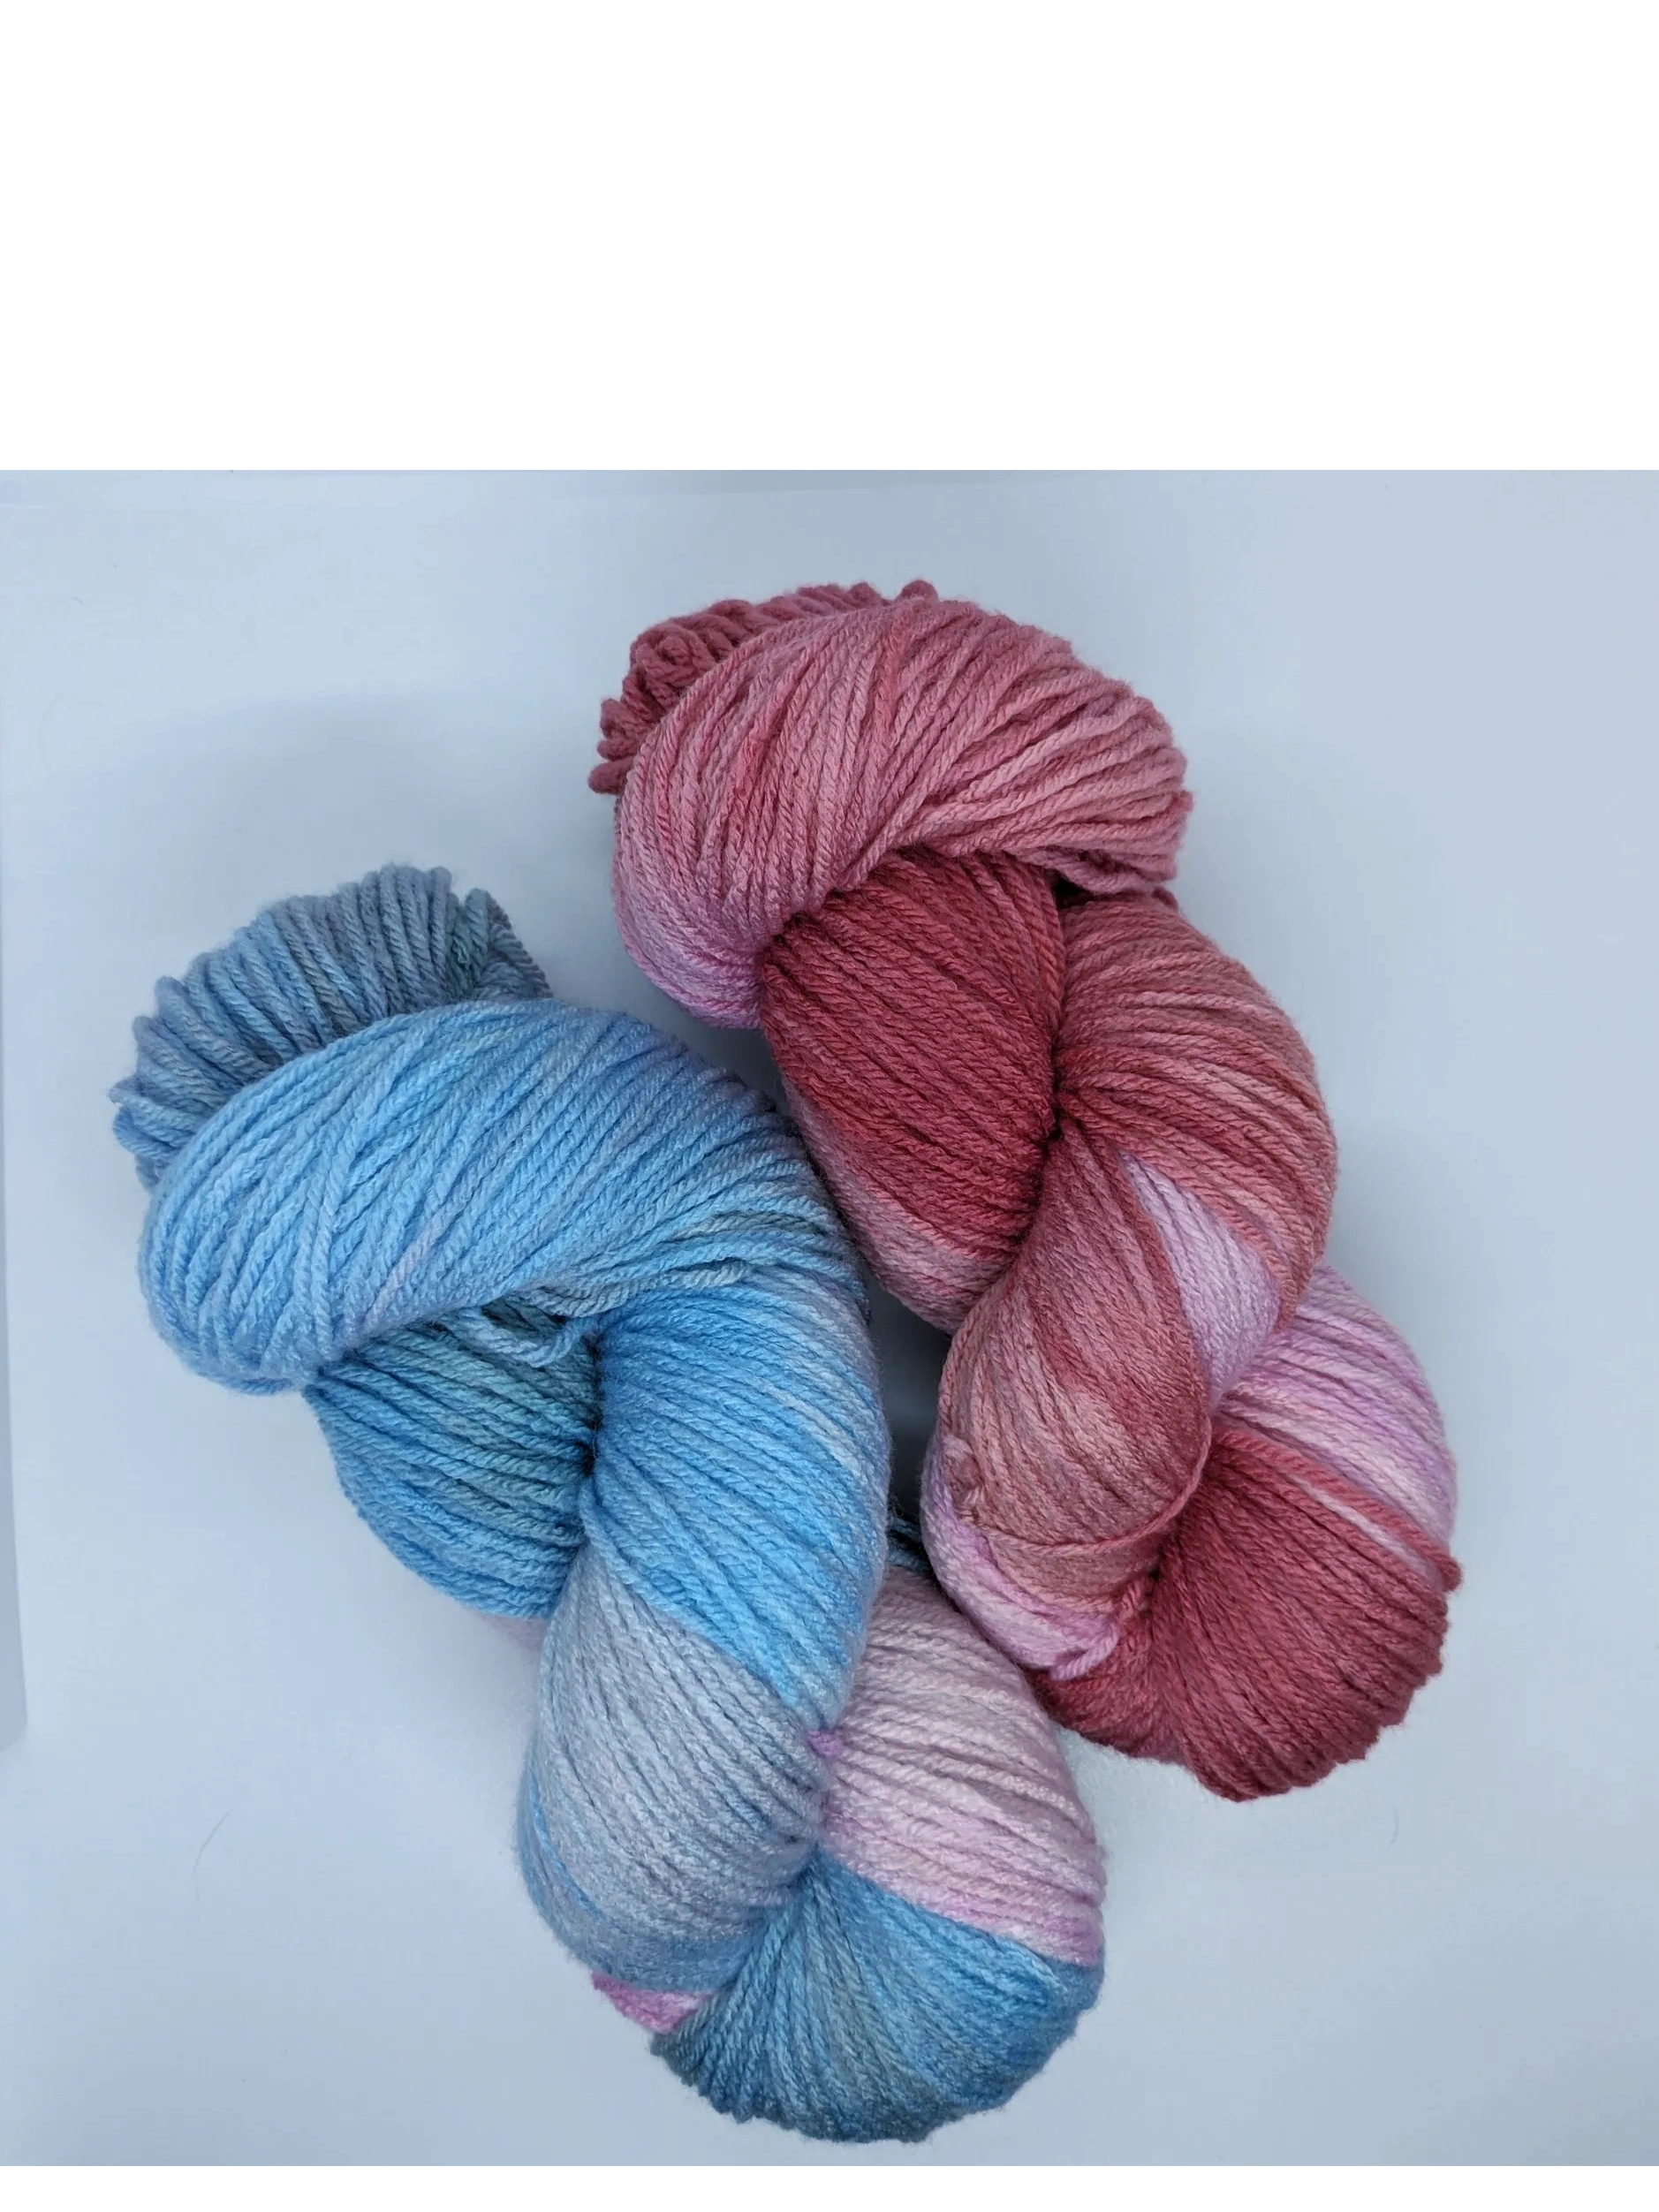 2 twisted skeins of yarn on a white background. One is light blue & pink, the other is red & pink.